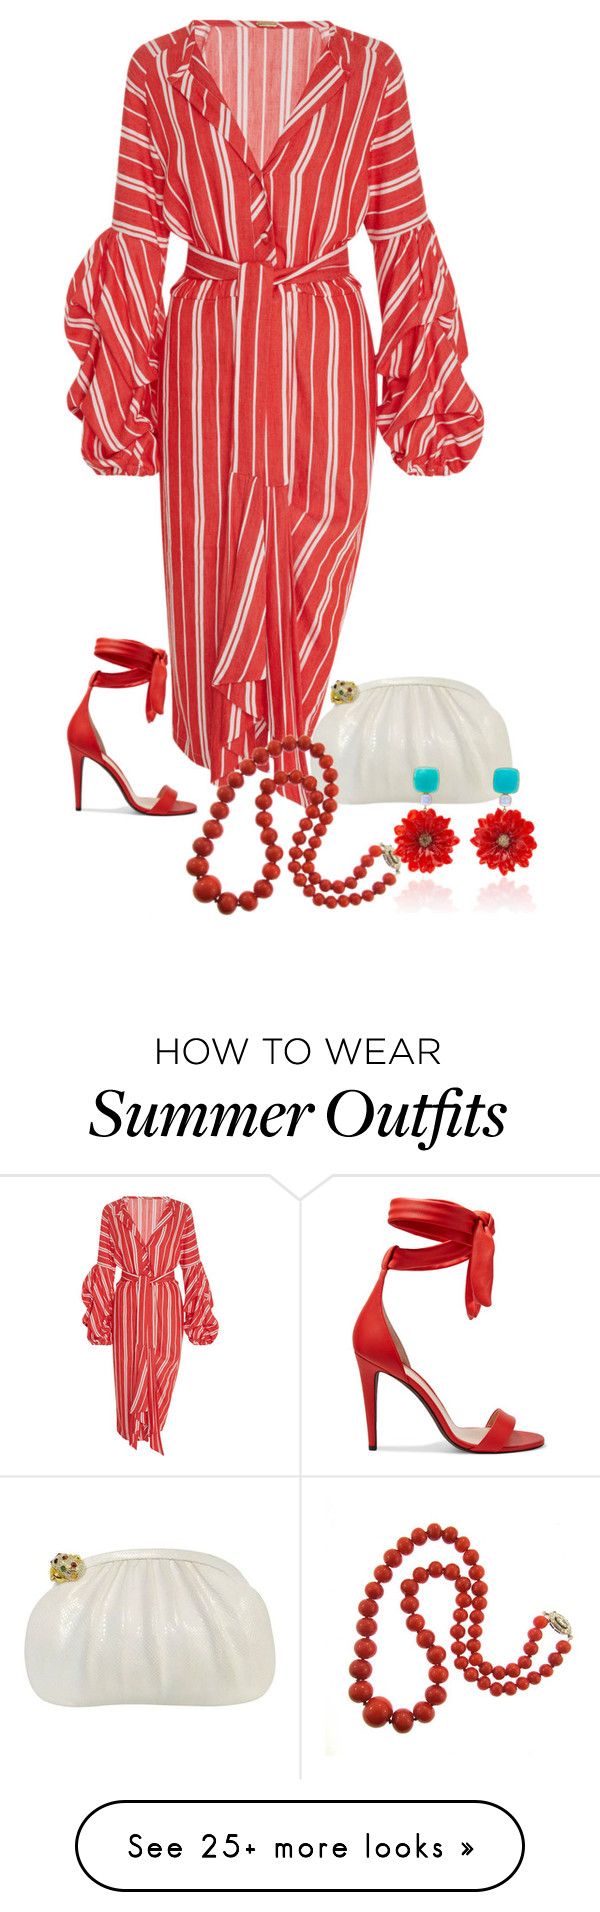 "Wedding Guest" by ahapplet on Polyvore featuring Johanna Ortiz, Off-W...